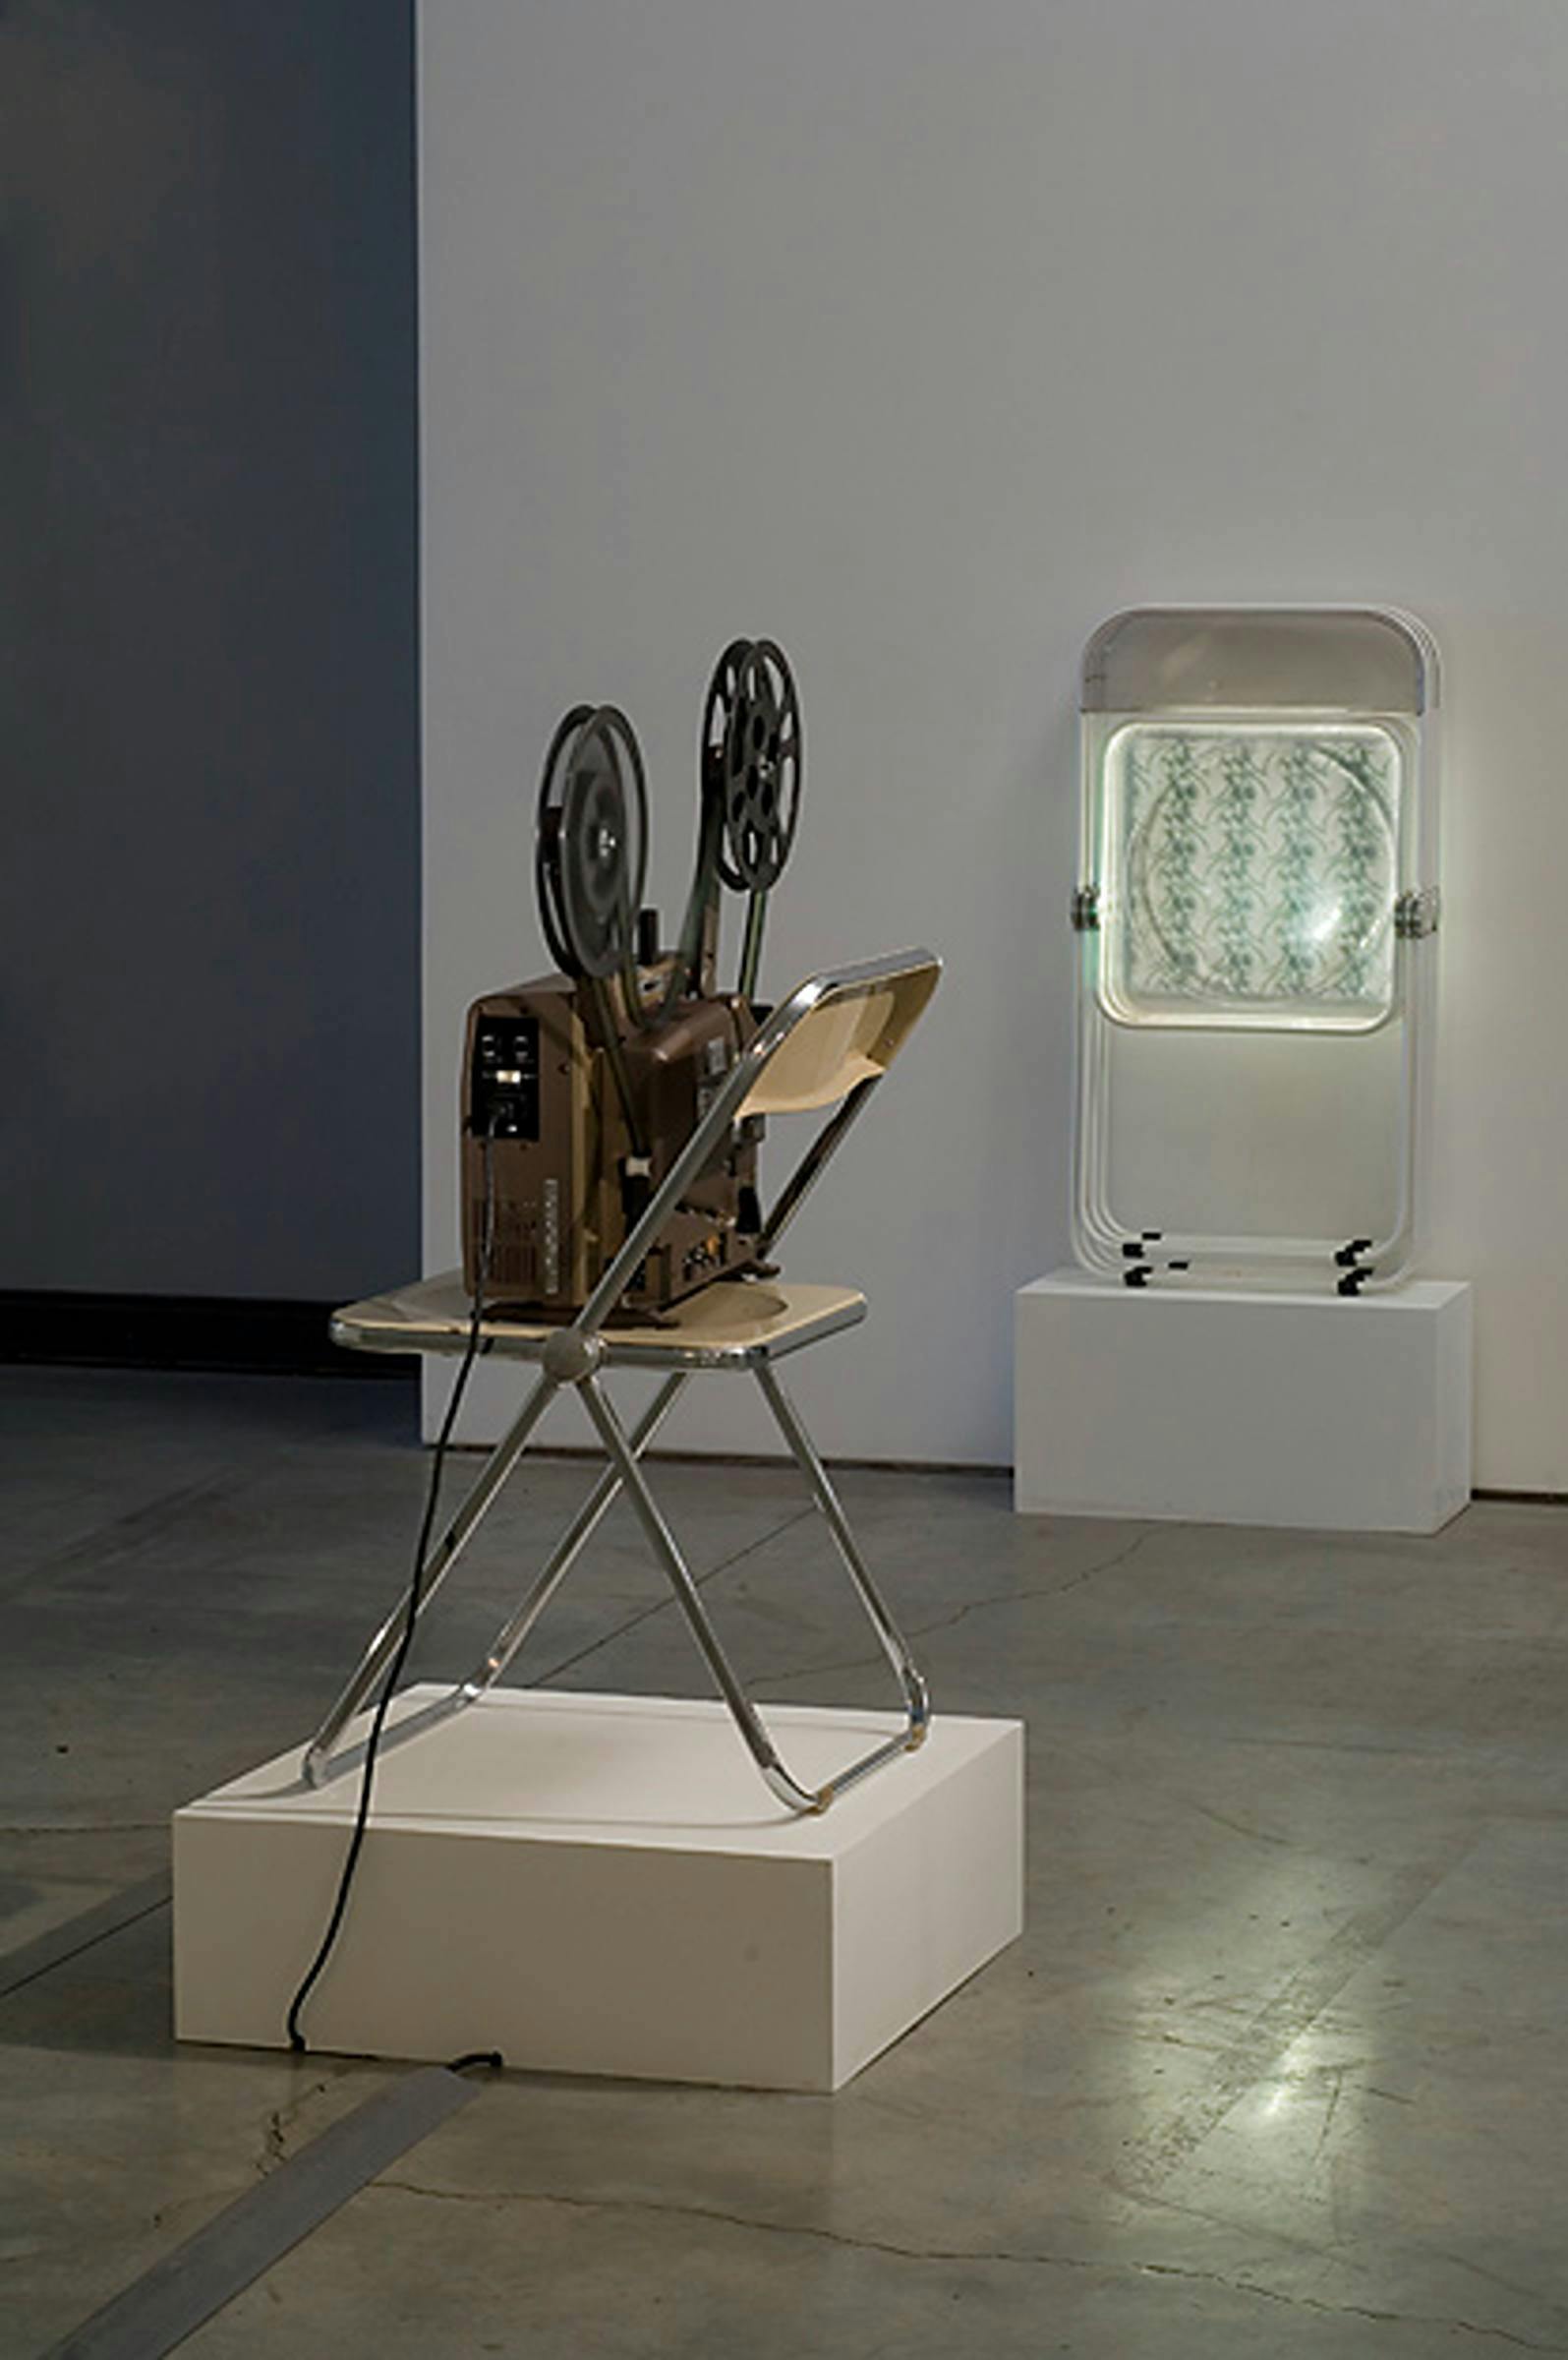 Image of a video camera with the film wound at the top, sat on top of a chair on a low-lying plinth. There is an object lent against the other wall also on a low-lying plinth.